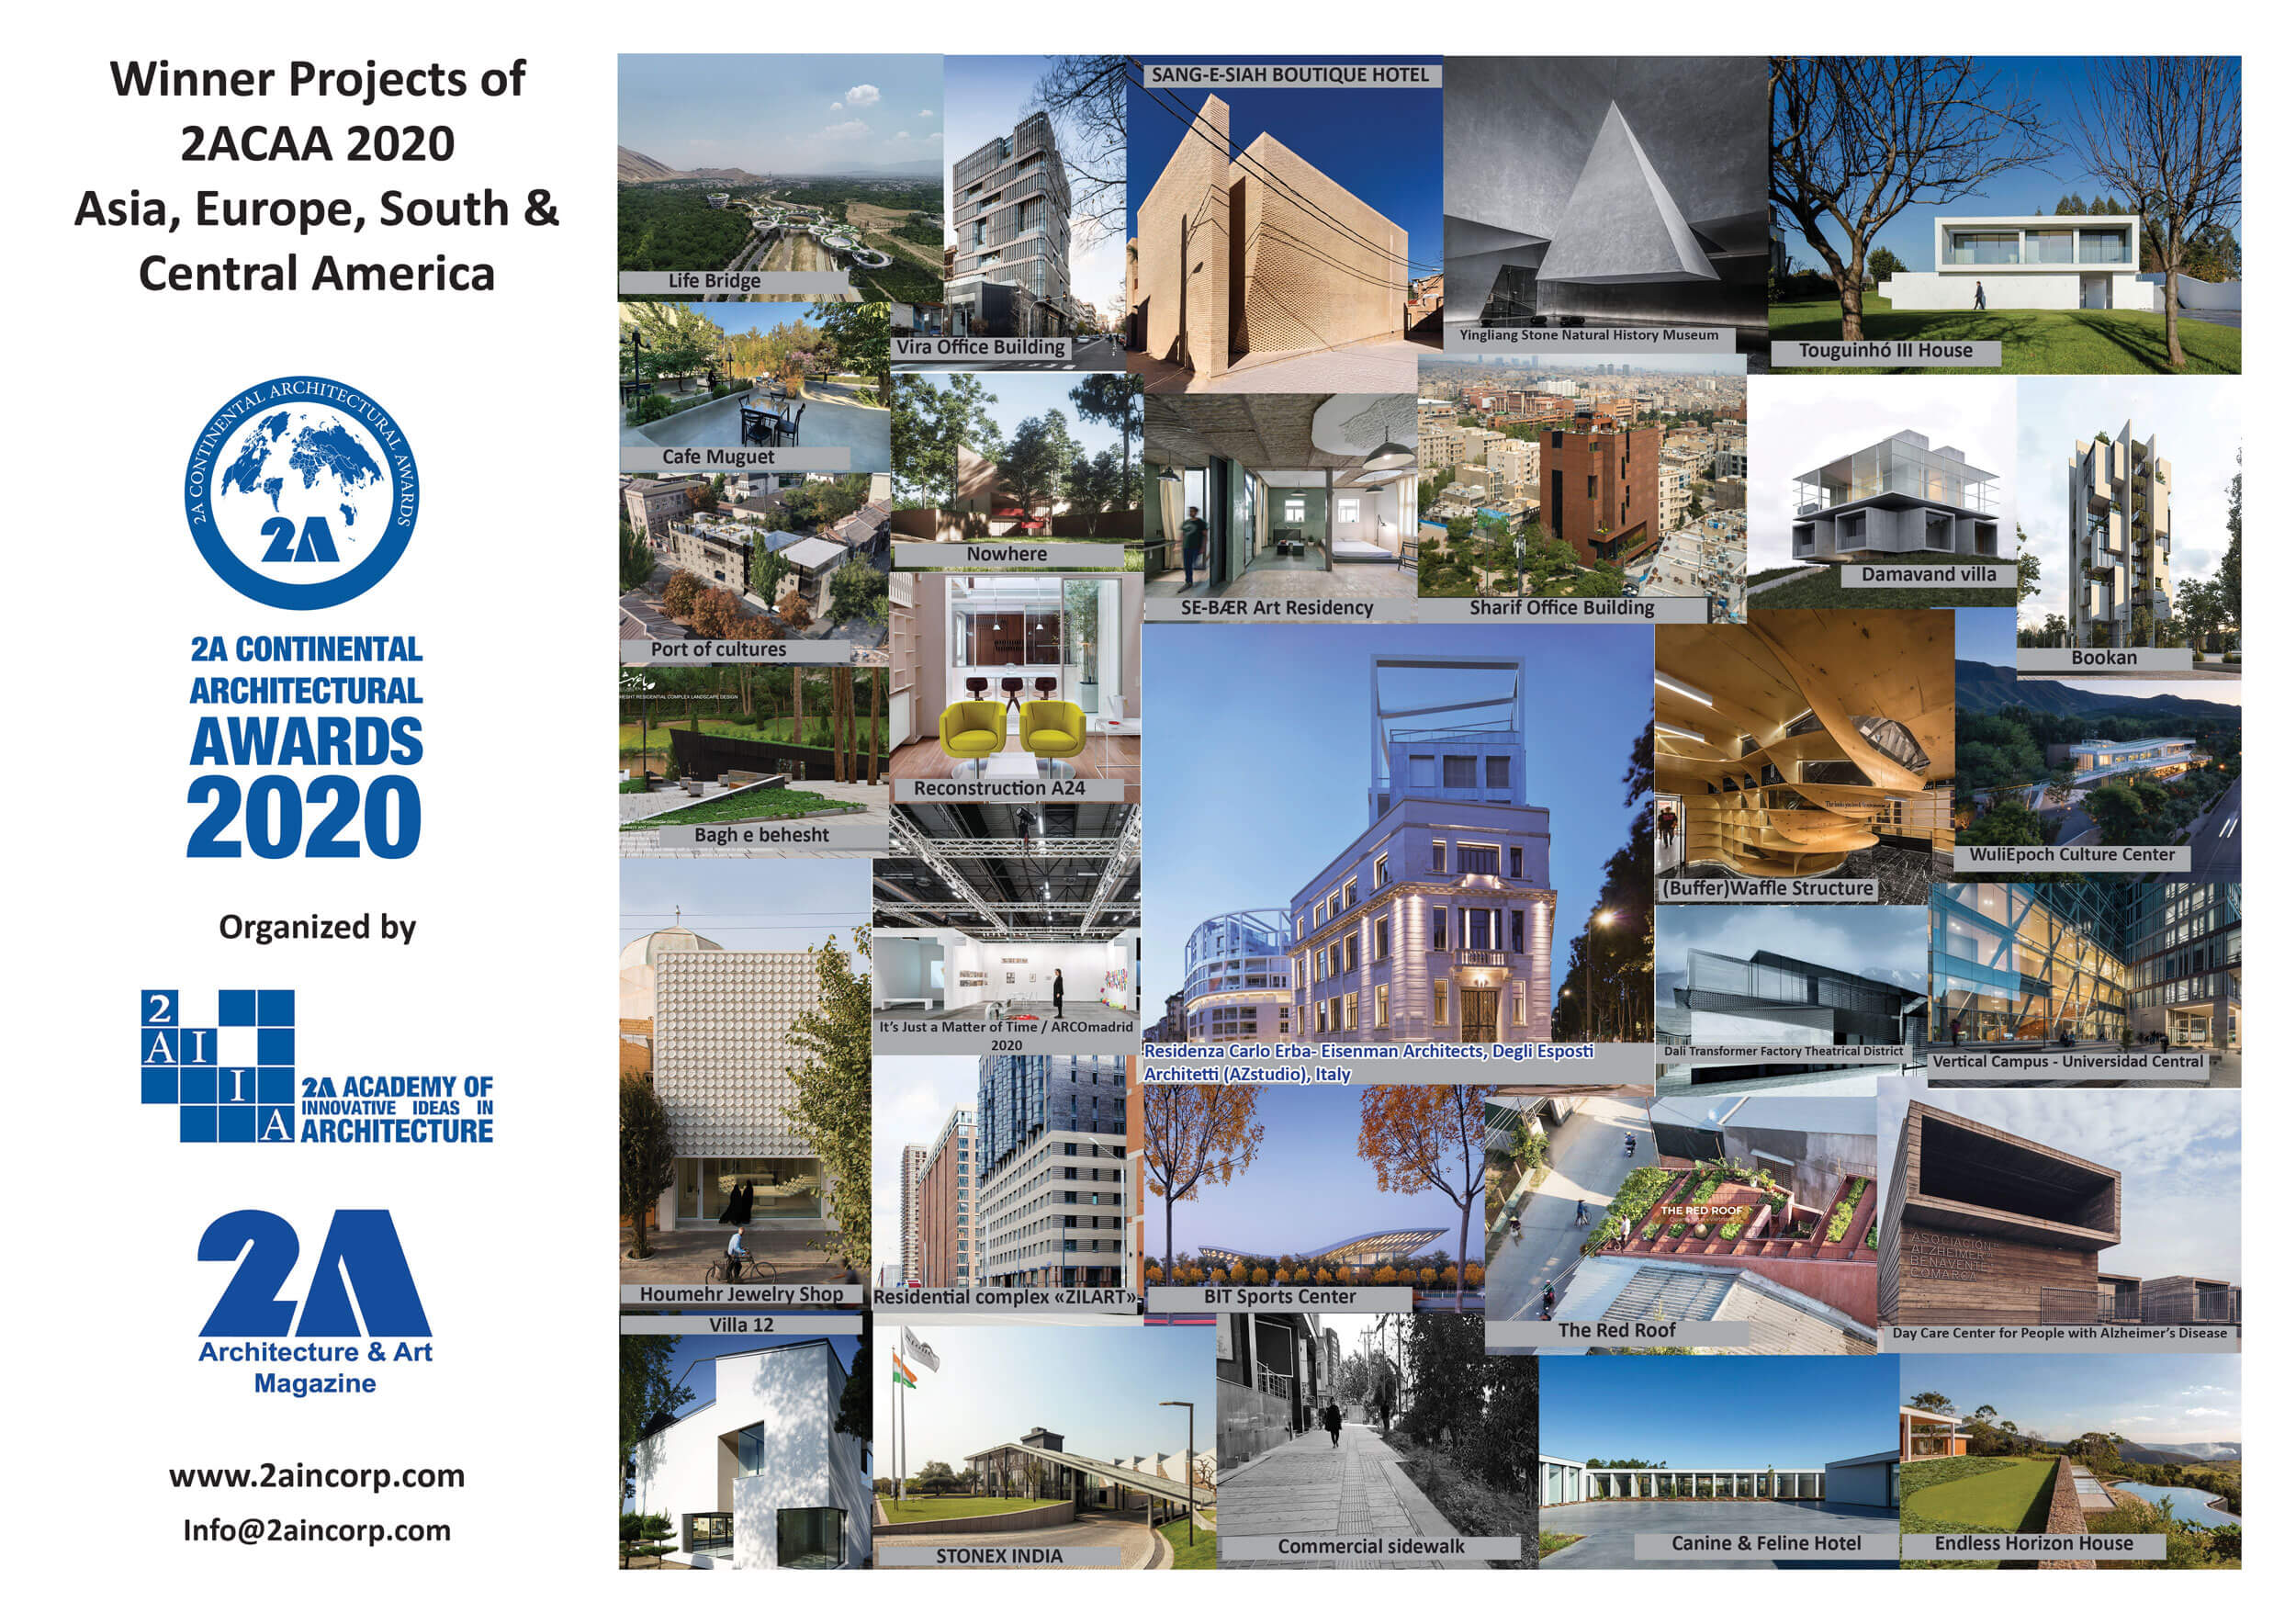 Winners of 2A Continental Architectureal Awards (2ACAA 2020)